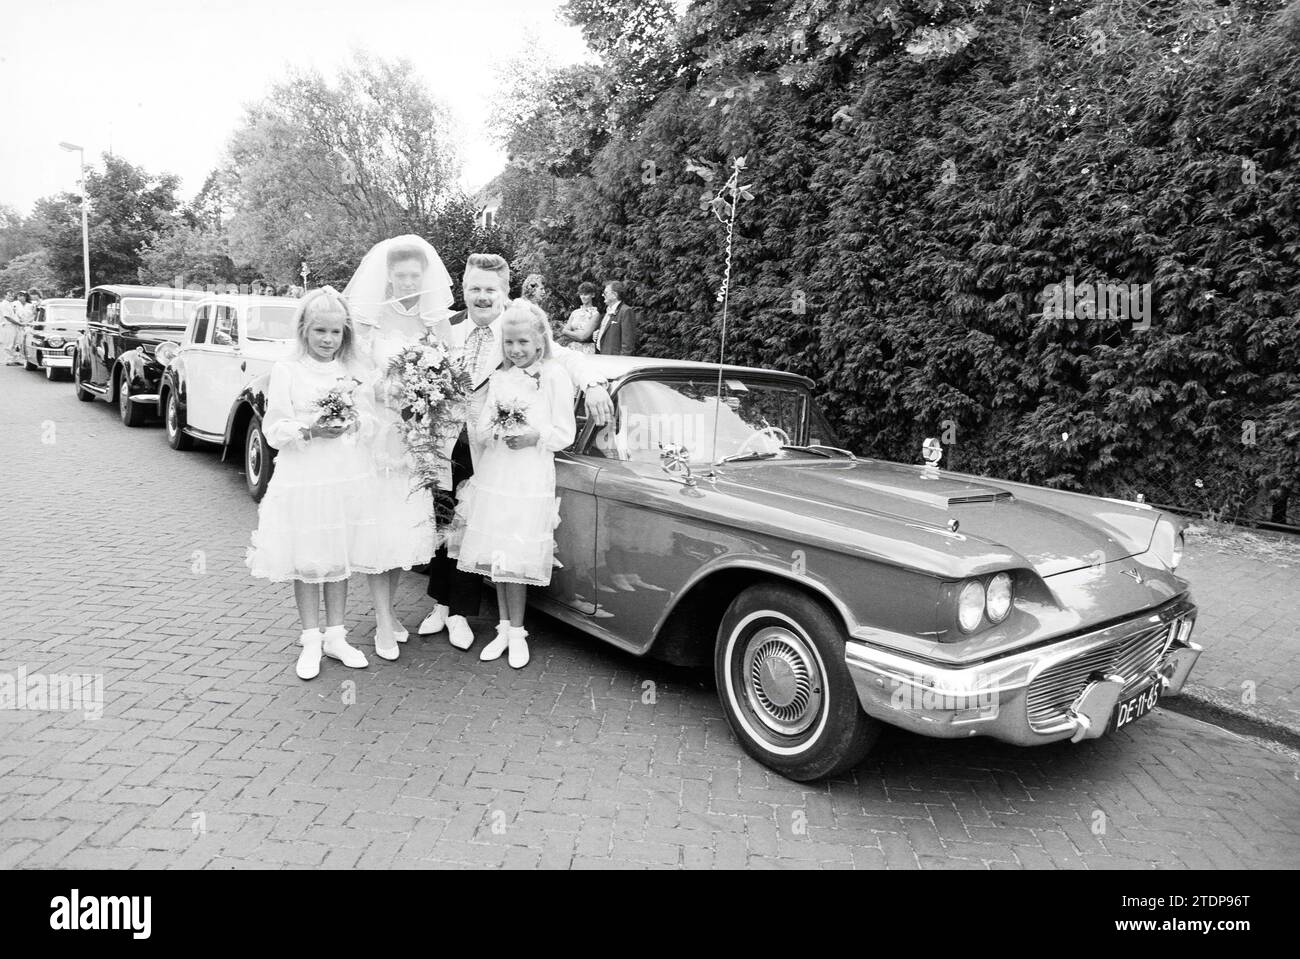 Rock and roll wedding, Marriage, 22-06-1989, Whizgle News from the Past, Tailored for the Future. Explore historical narratives, Dutch The Netherlands agency image with a modern perspective, bridging the gap between yesterday's events and tomorrow's insights. A timeless journey shaping the stories that shape our future Stock Photo